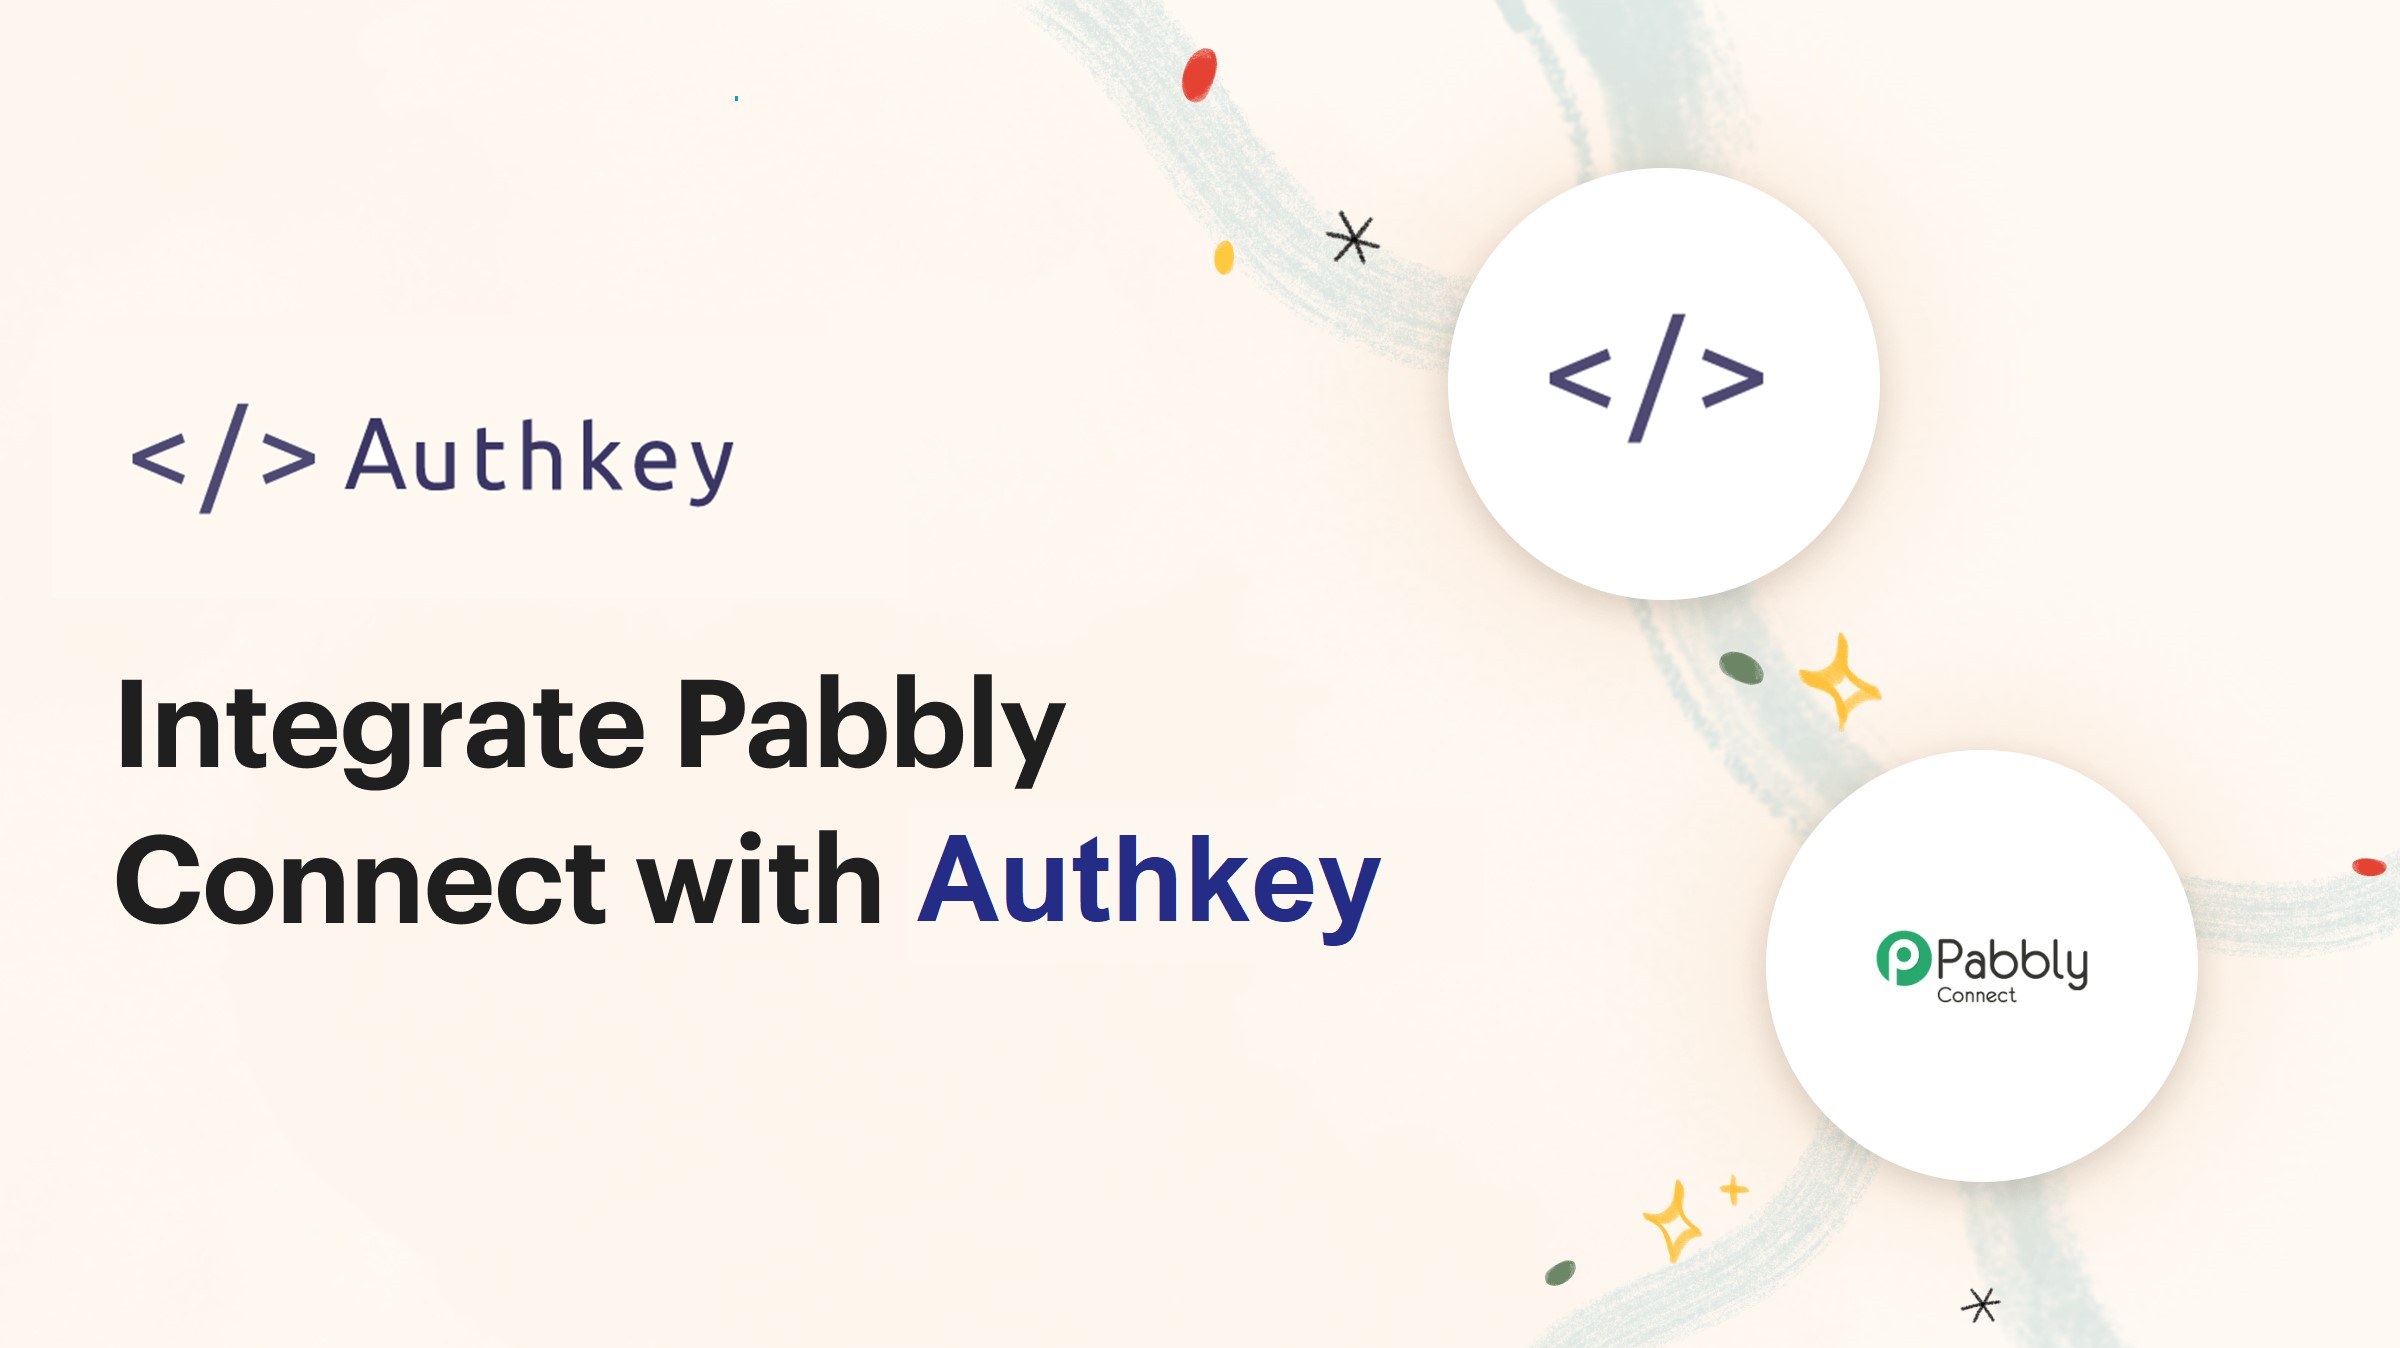 Integrate Pabbly Connect with Authkey